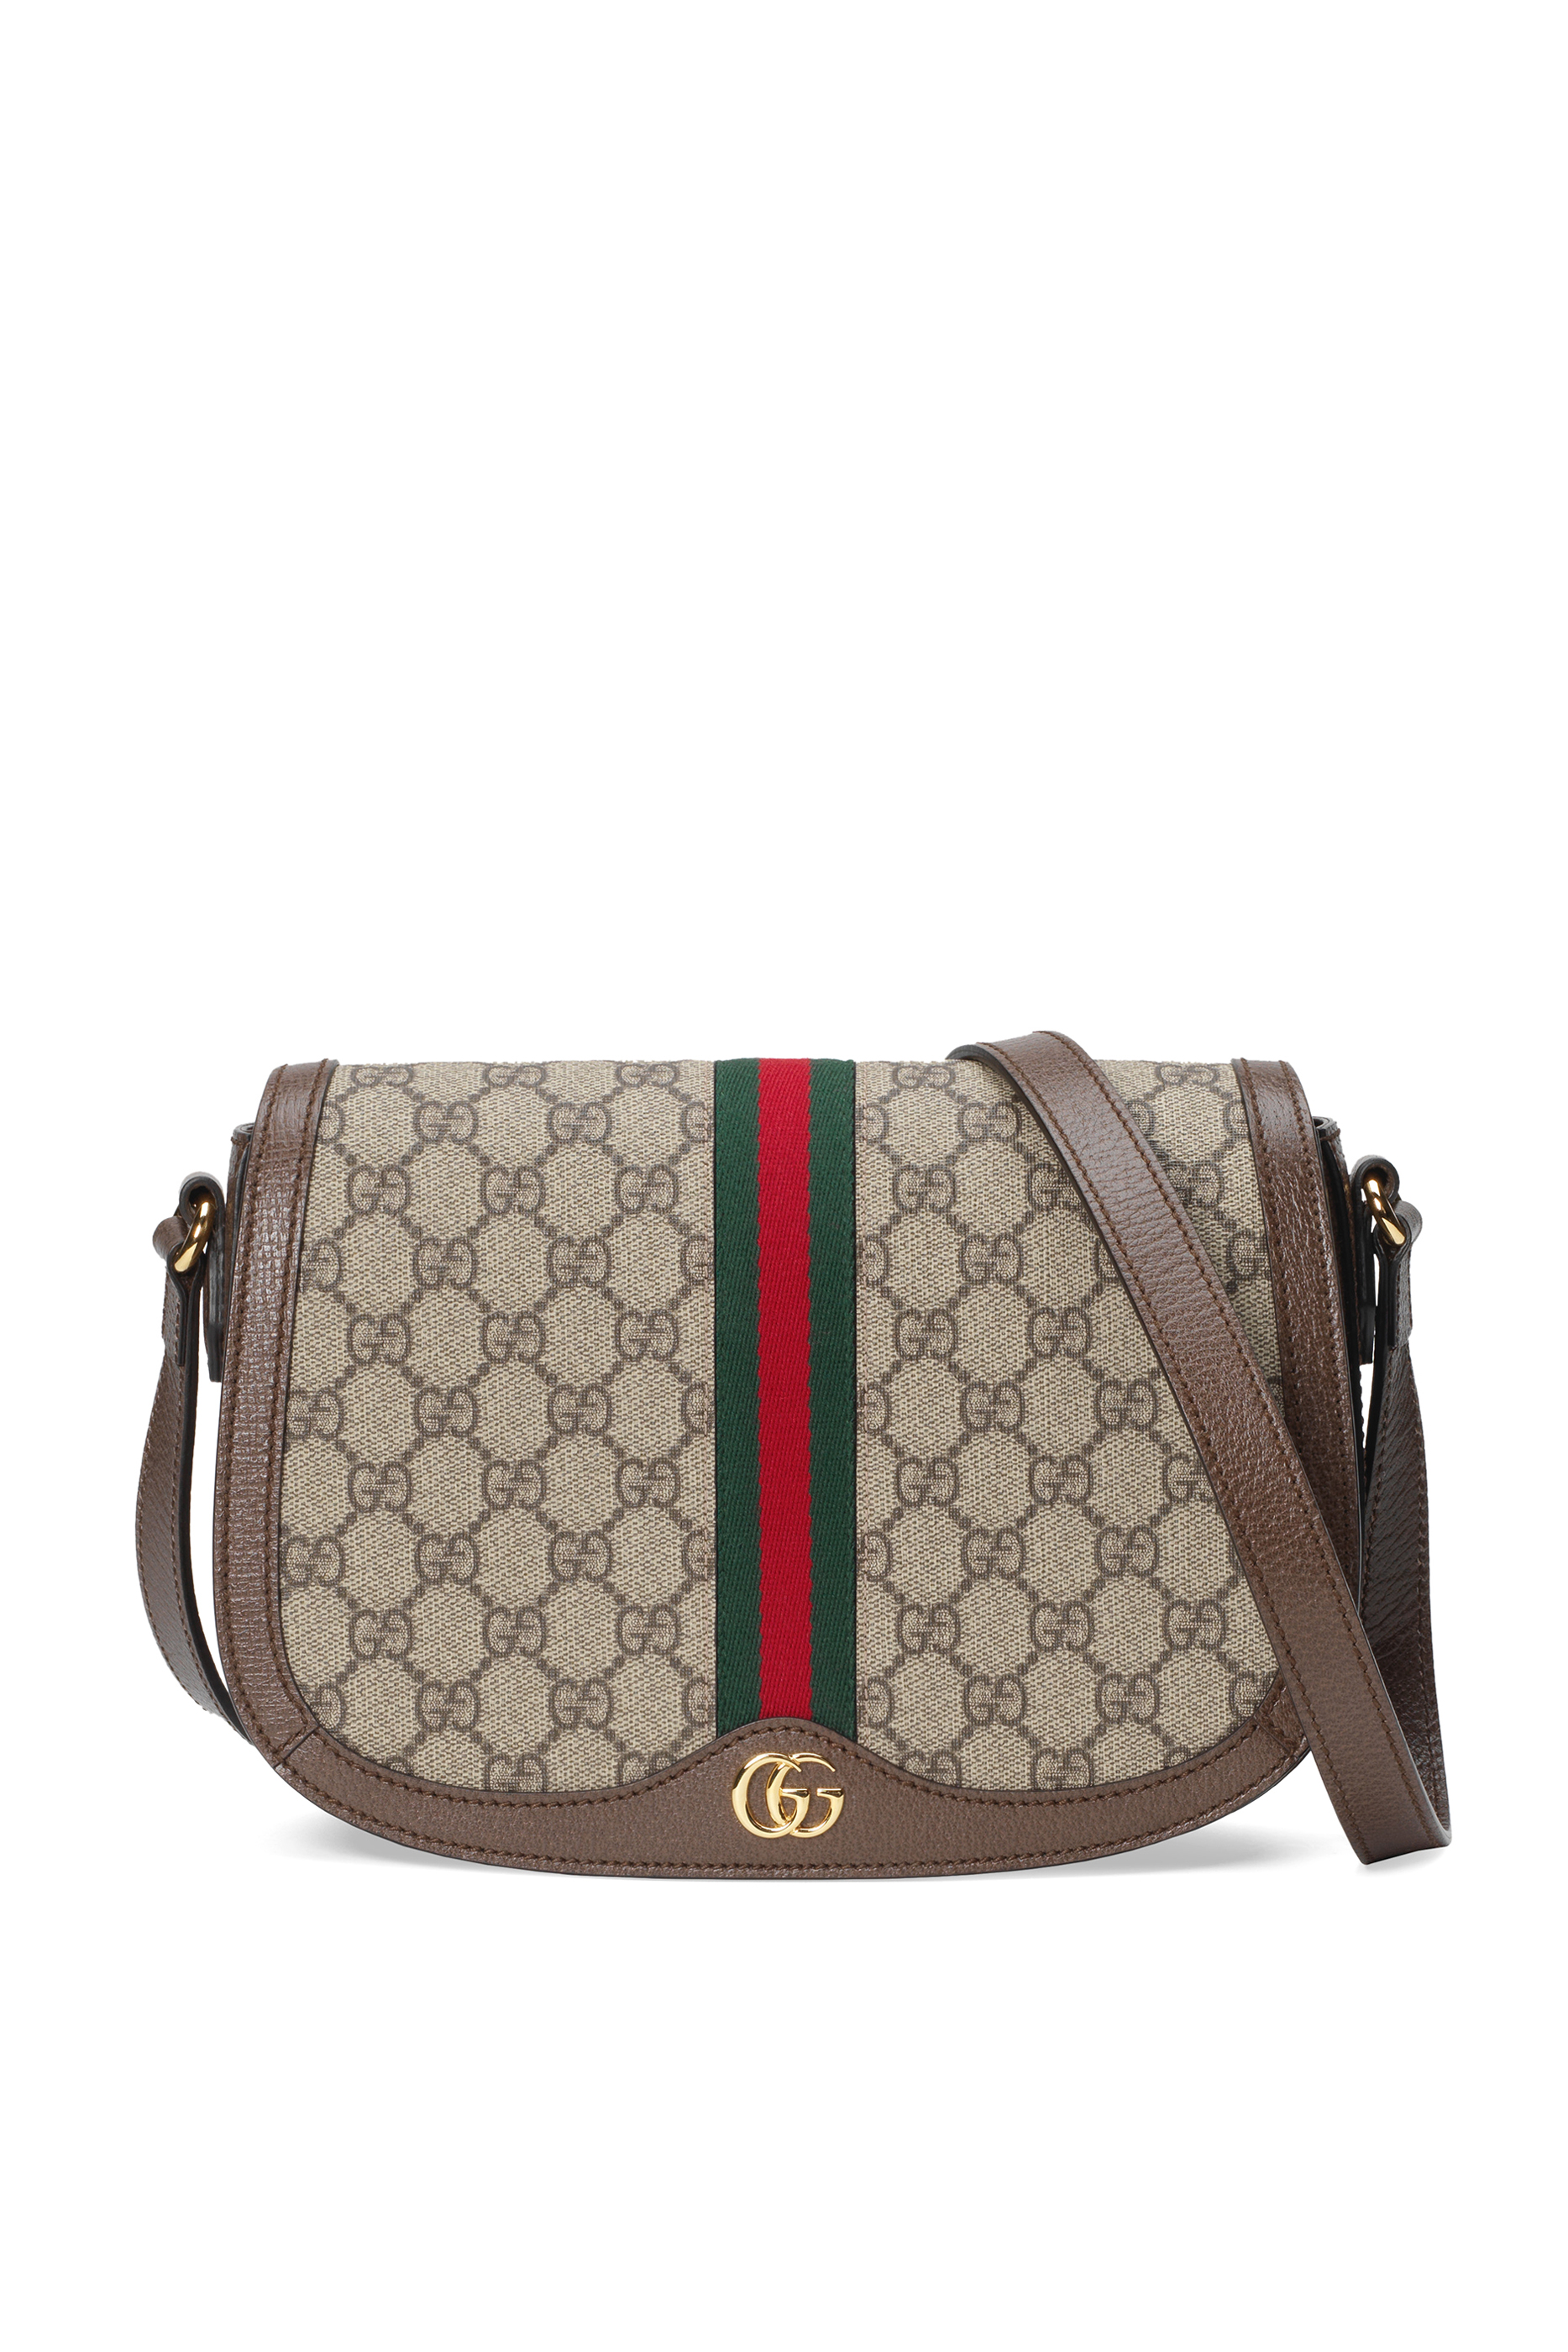 Buy Gucci Ophidia GG Small Shoulder Bag for Womens | Bloomingdale's Kuwait